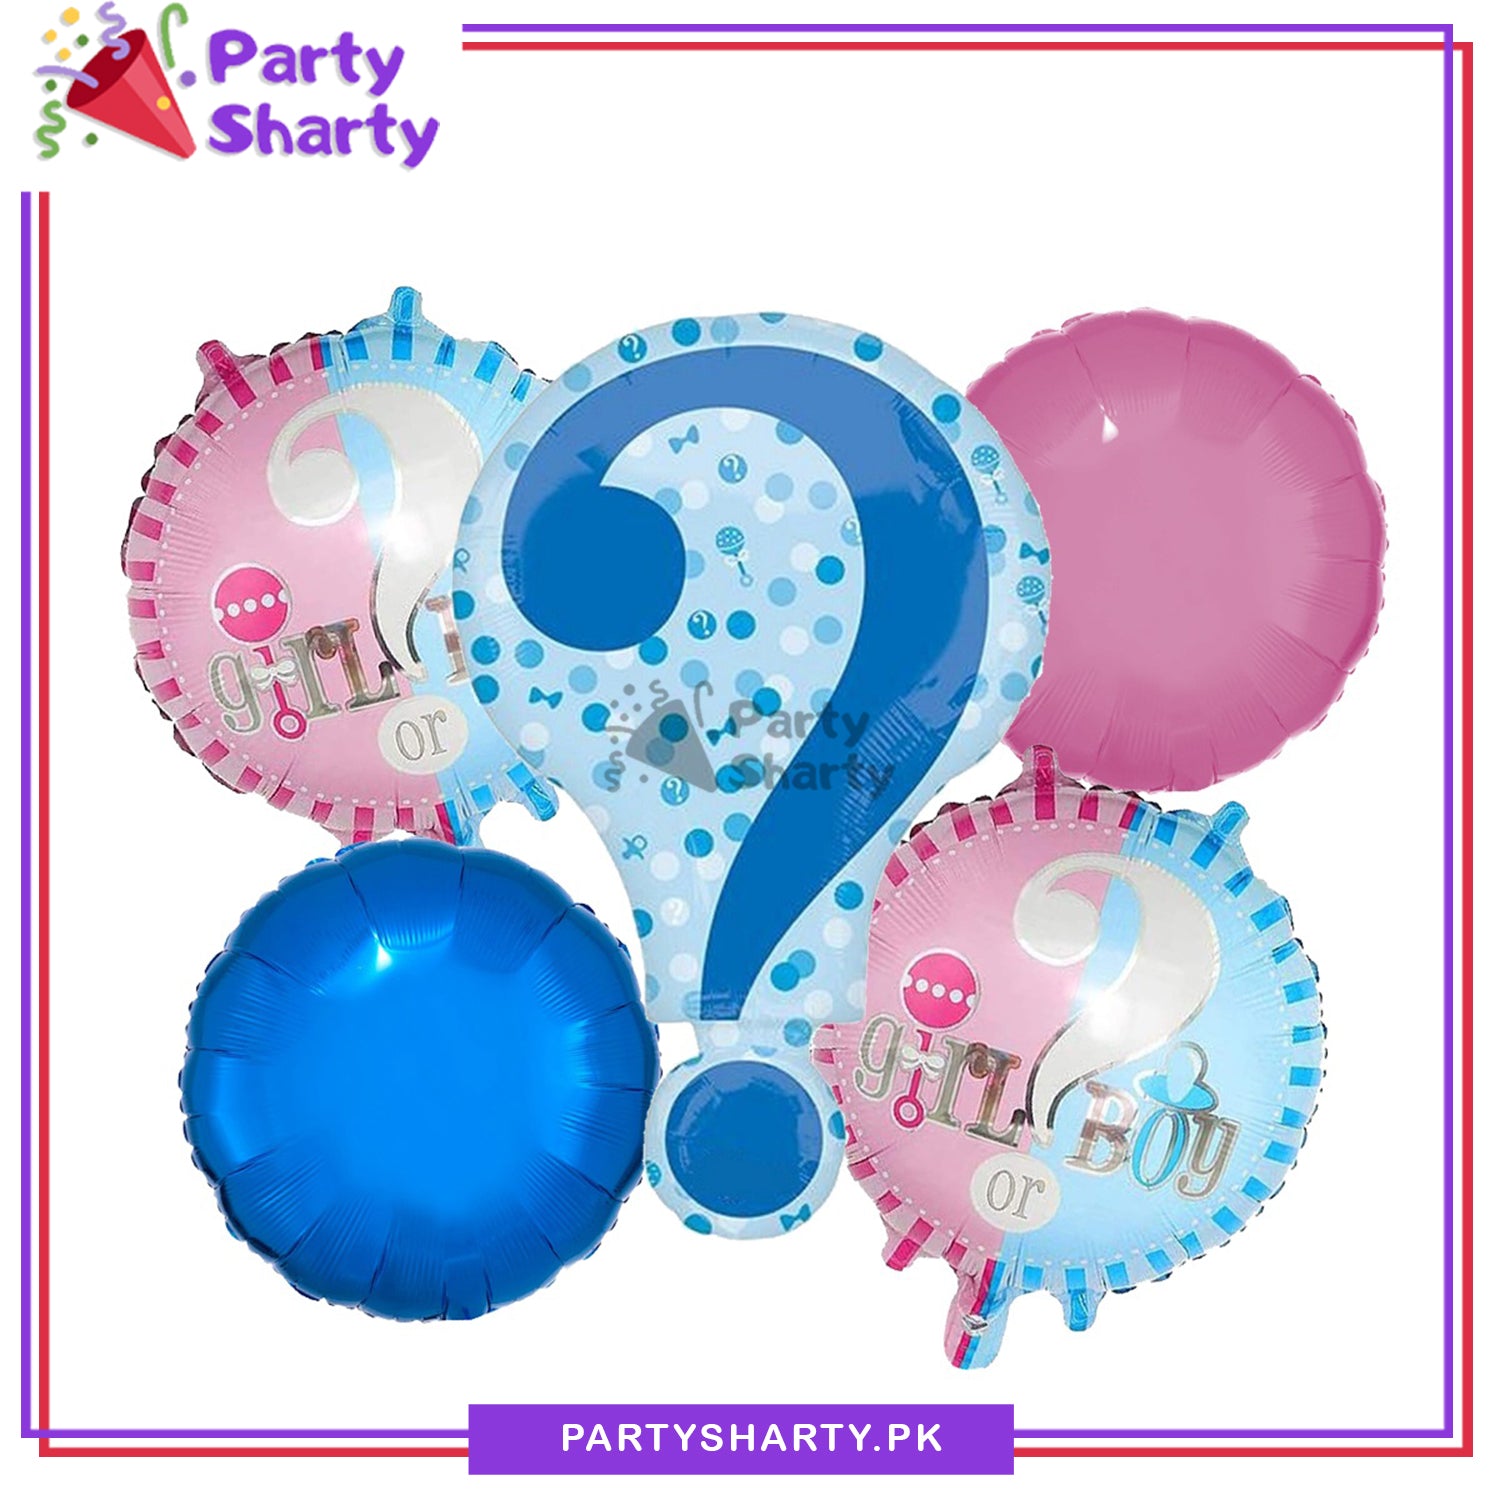 Stylish Boy or Girl Gender Reveal Foil Balloon set of 5 For Baby Showe –  Party Sharty